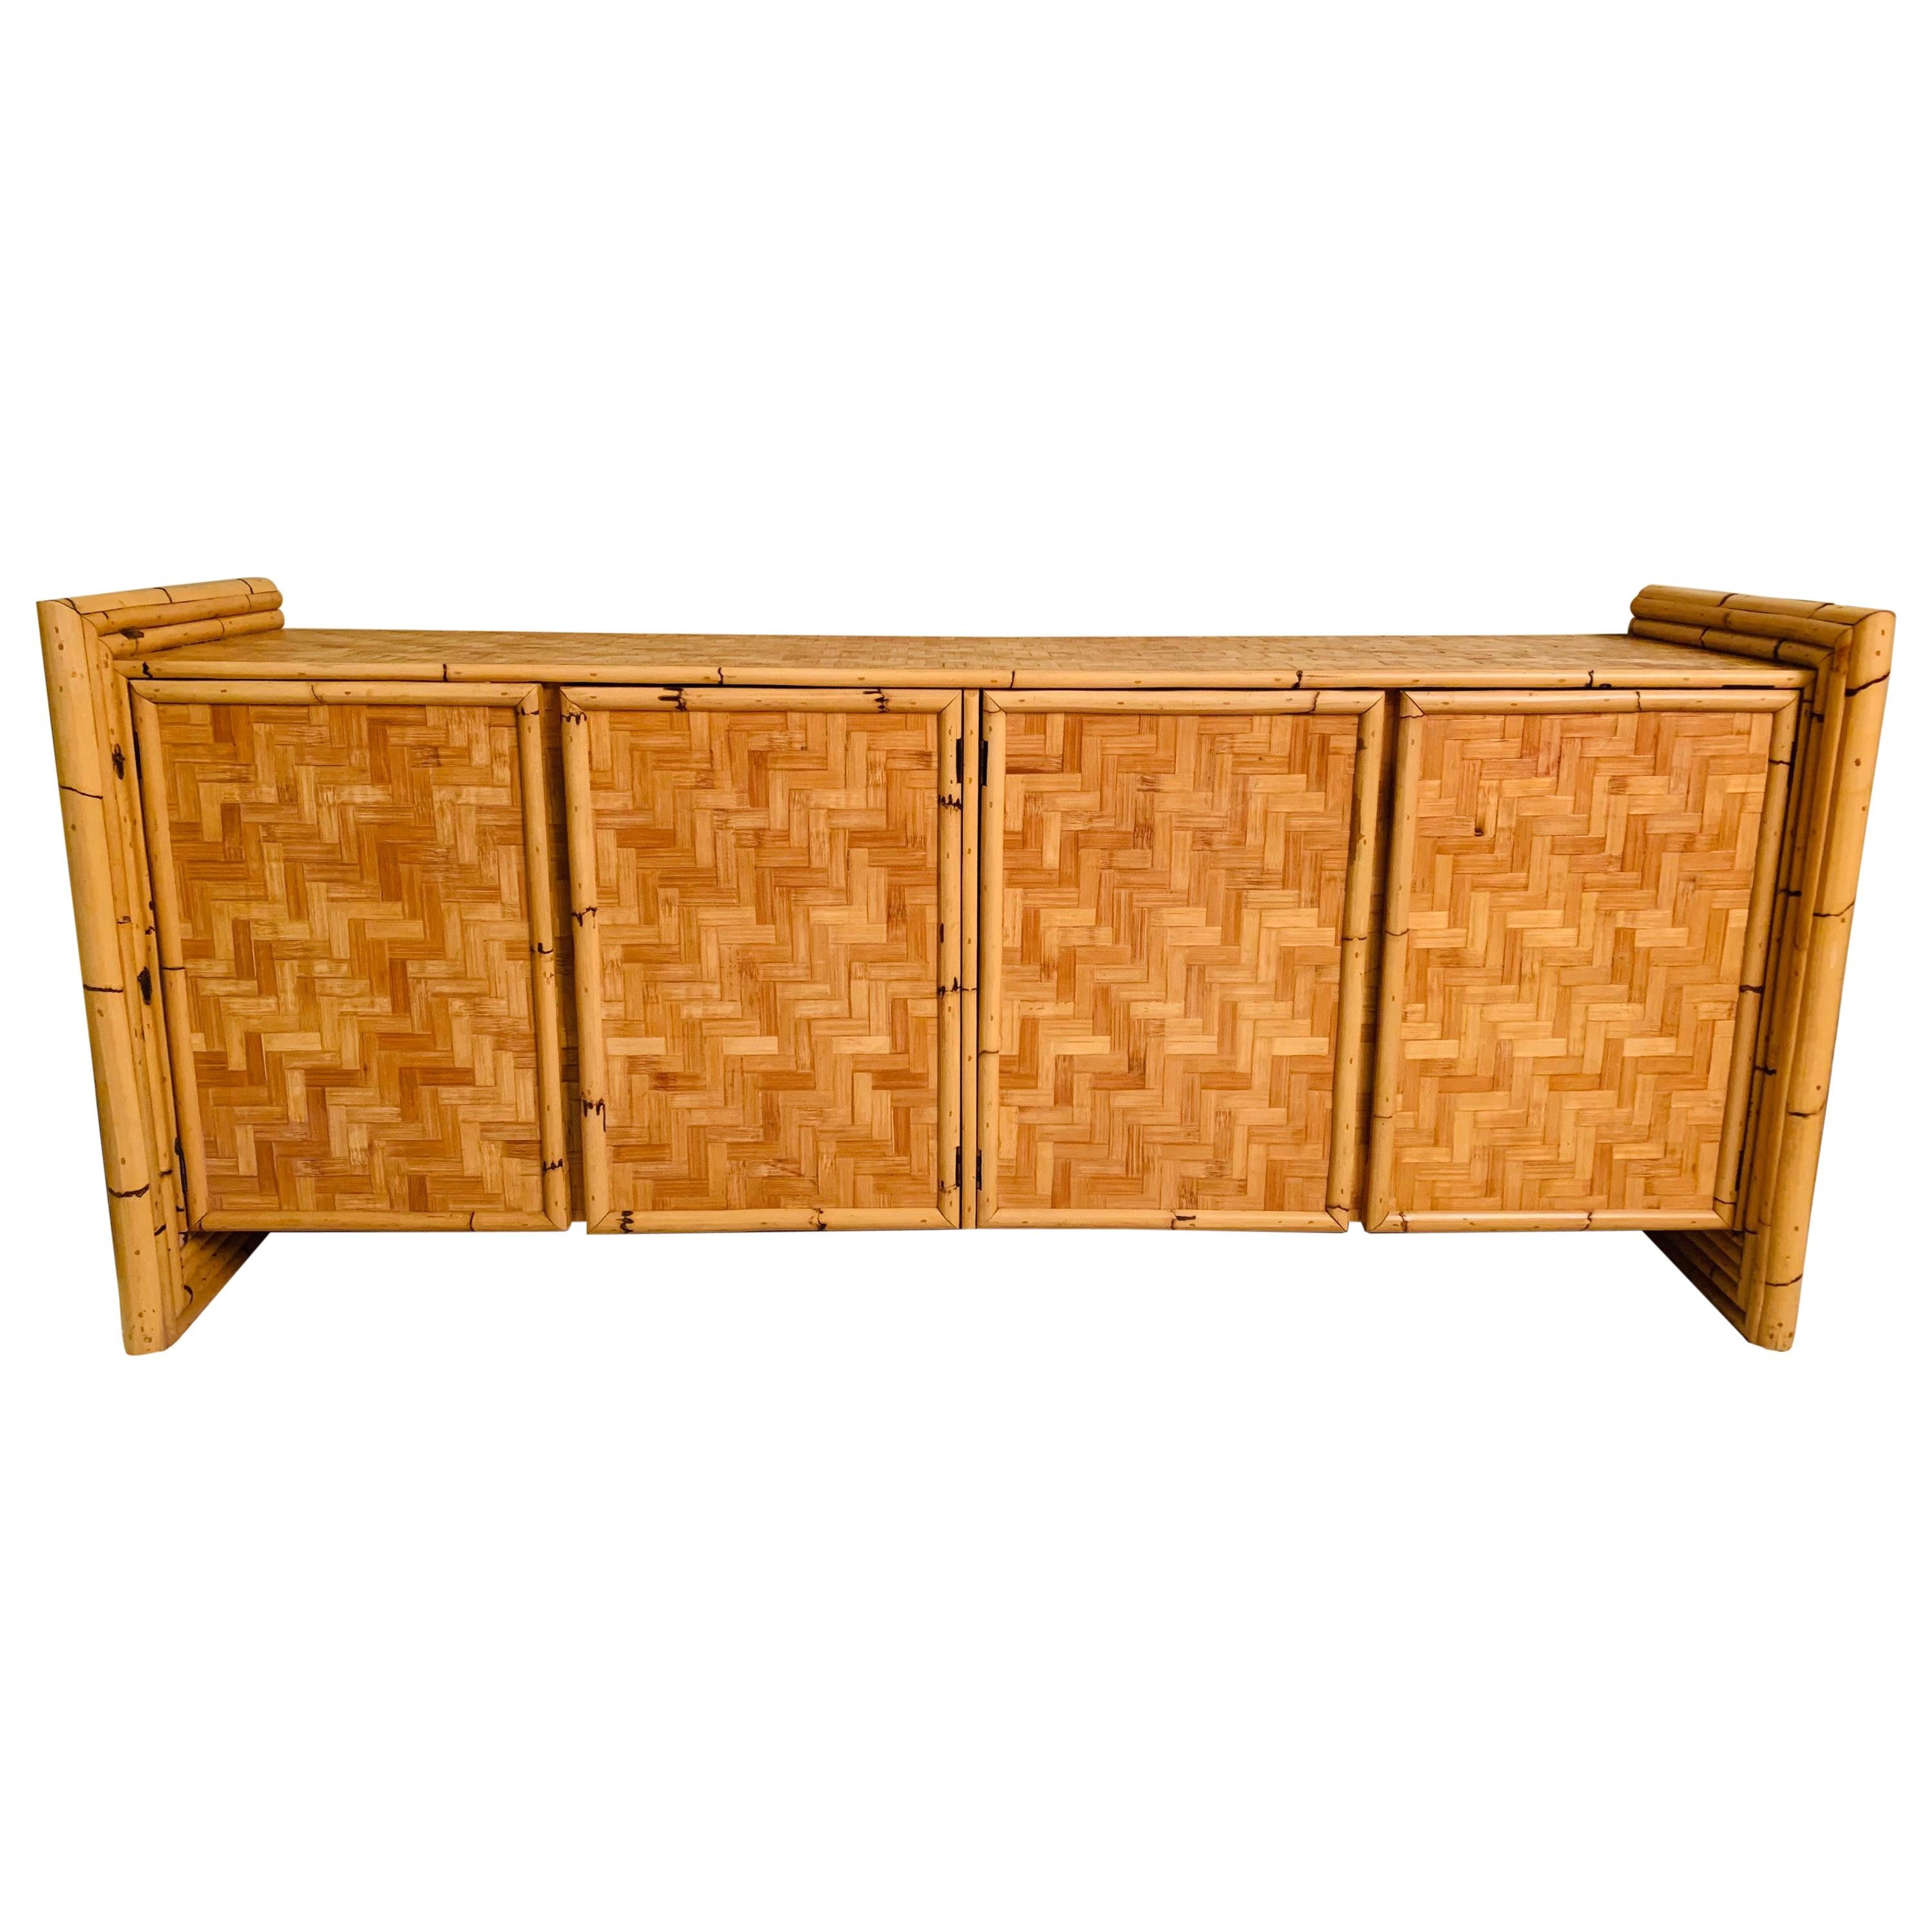 Vintage Bamboo Credenza with Woven Cane Parquetry